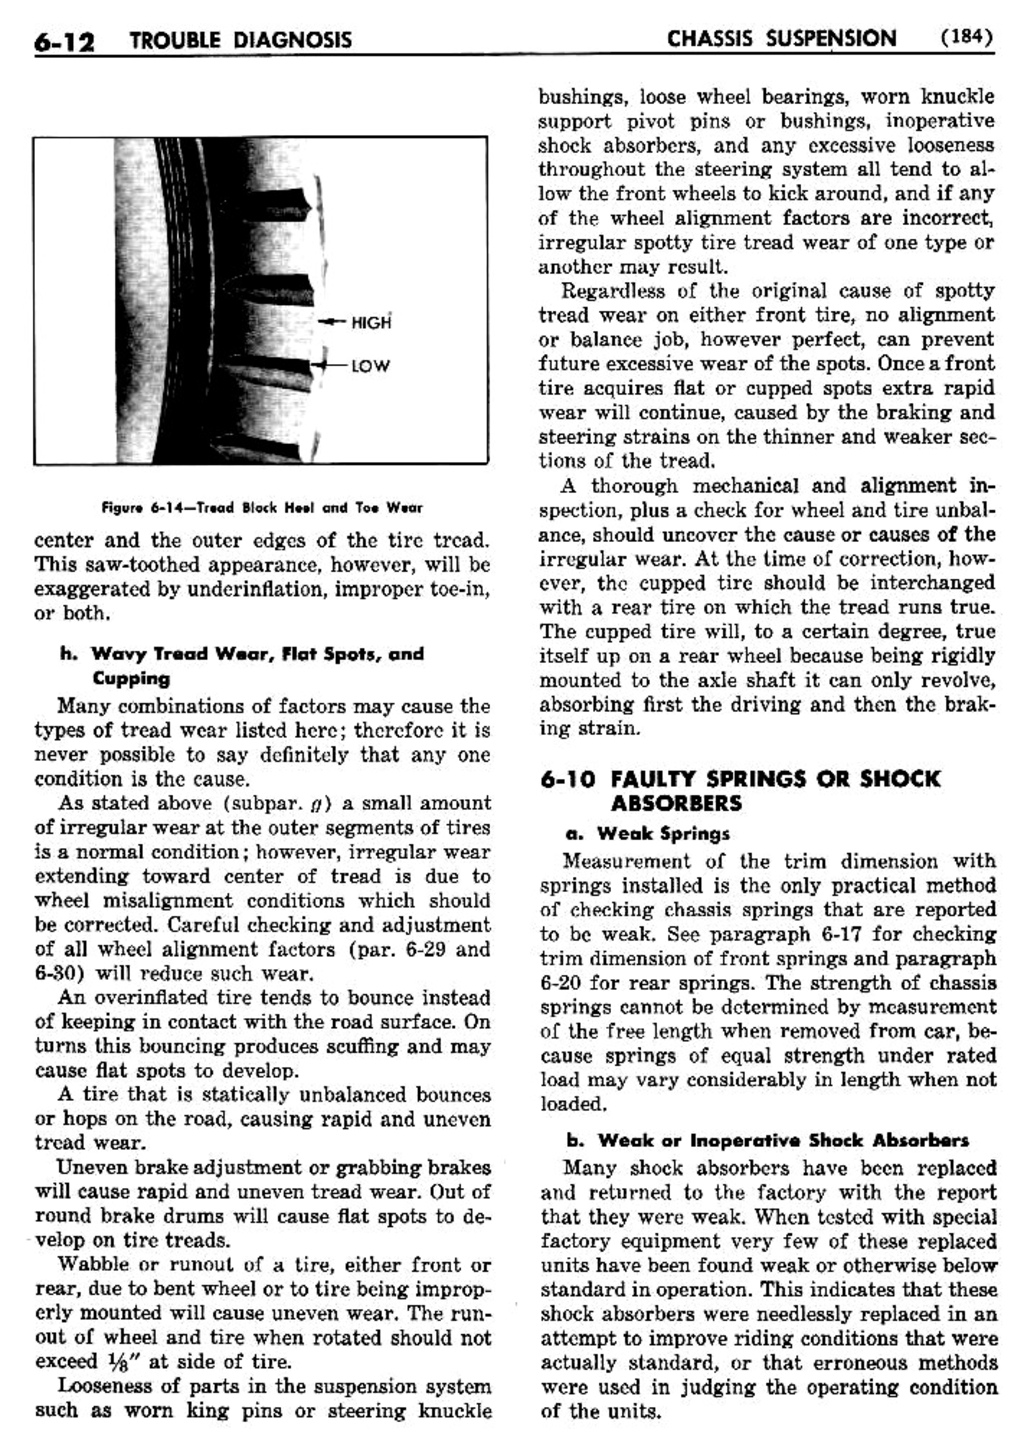 n_07 1950 Buick Shop Manual - Chassis Suspension-012-012.jpg